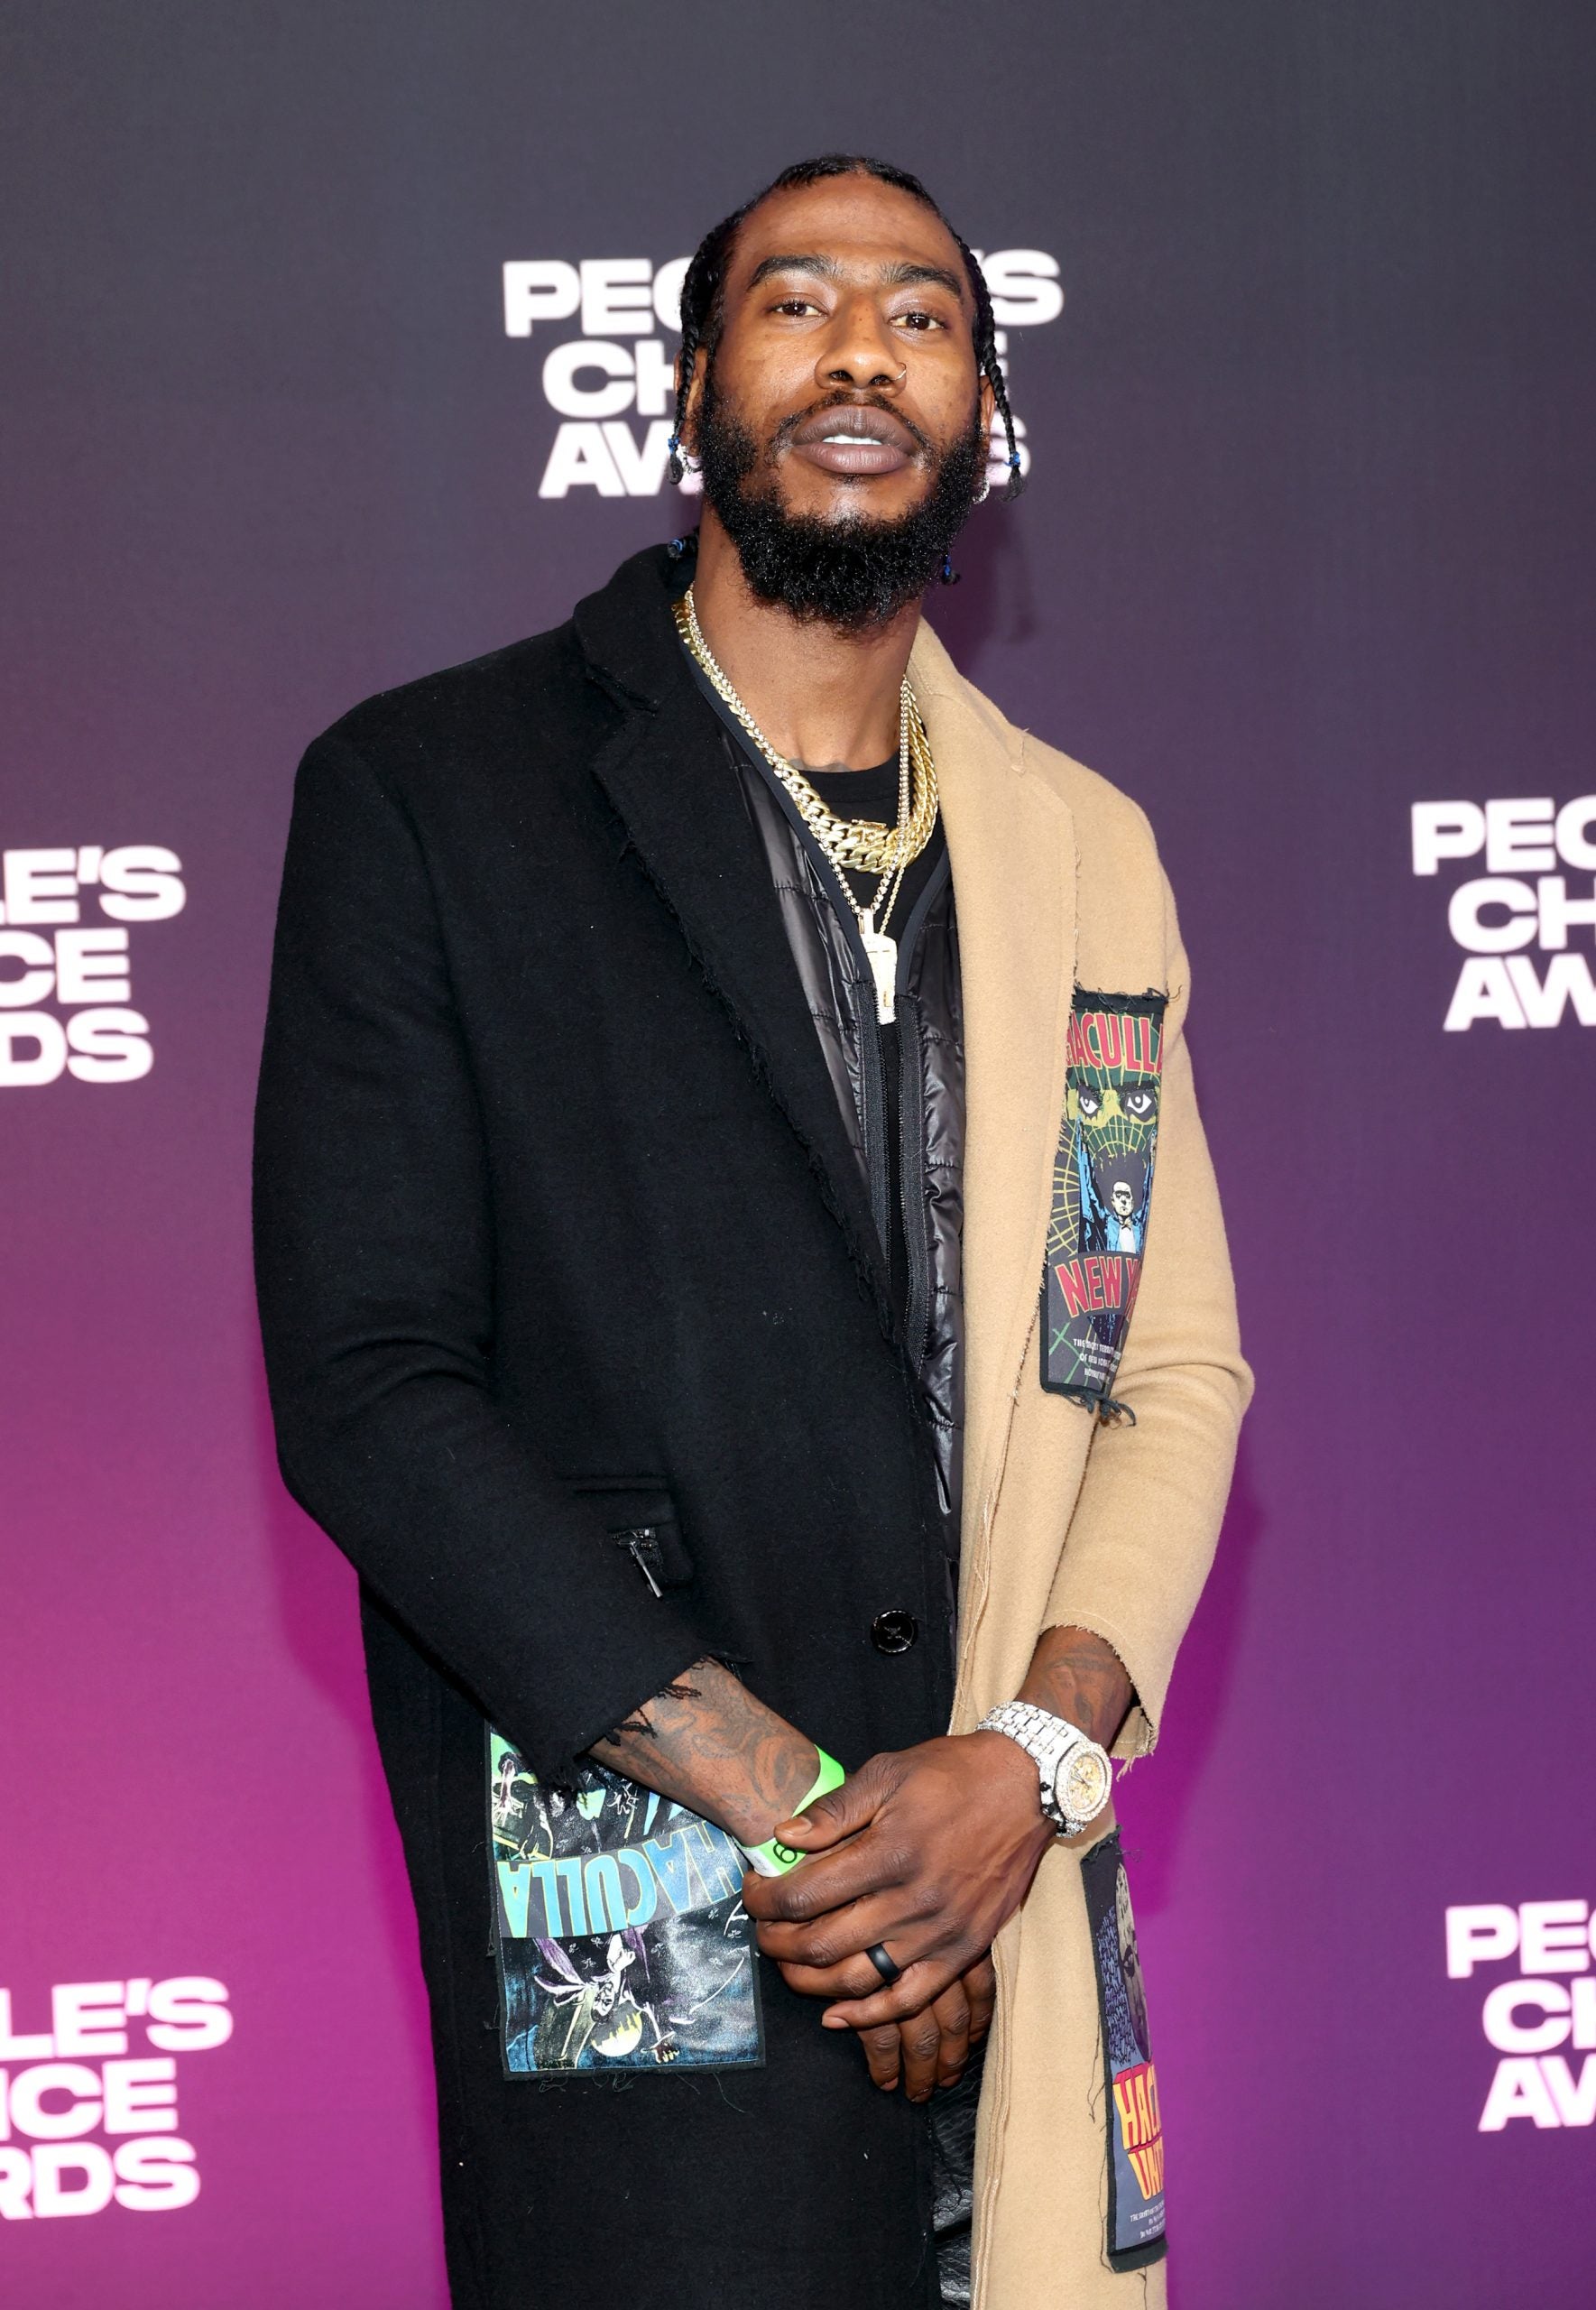 Stars Dazzled On The Red Carpet Of The 2021 E! People's Choice Awards